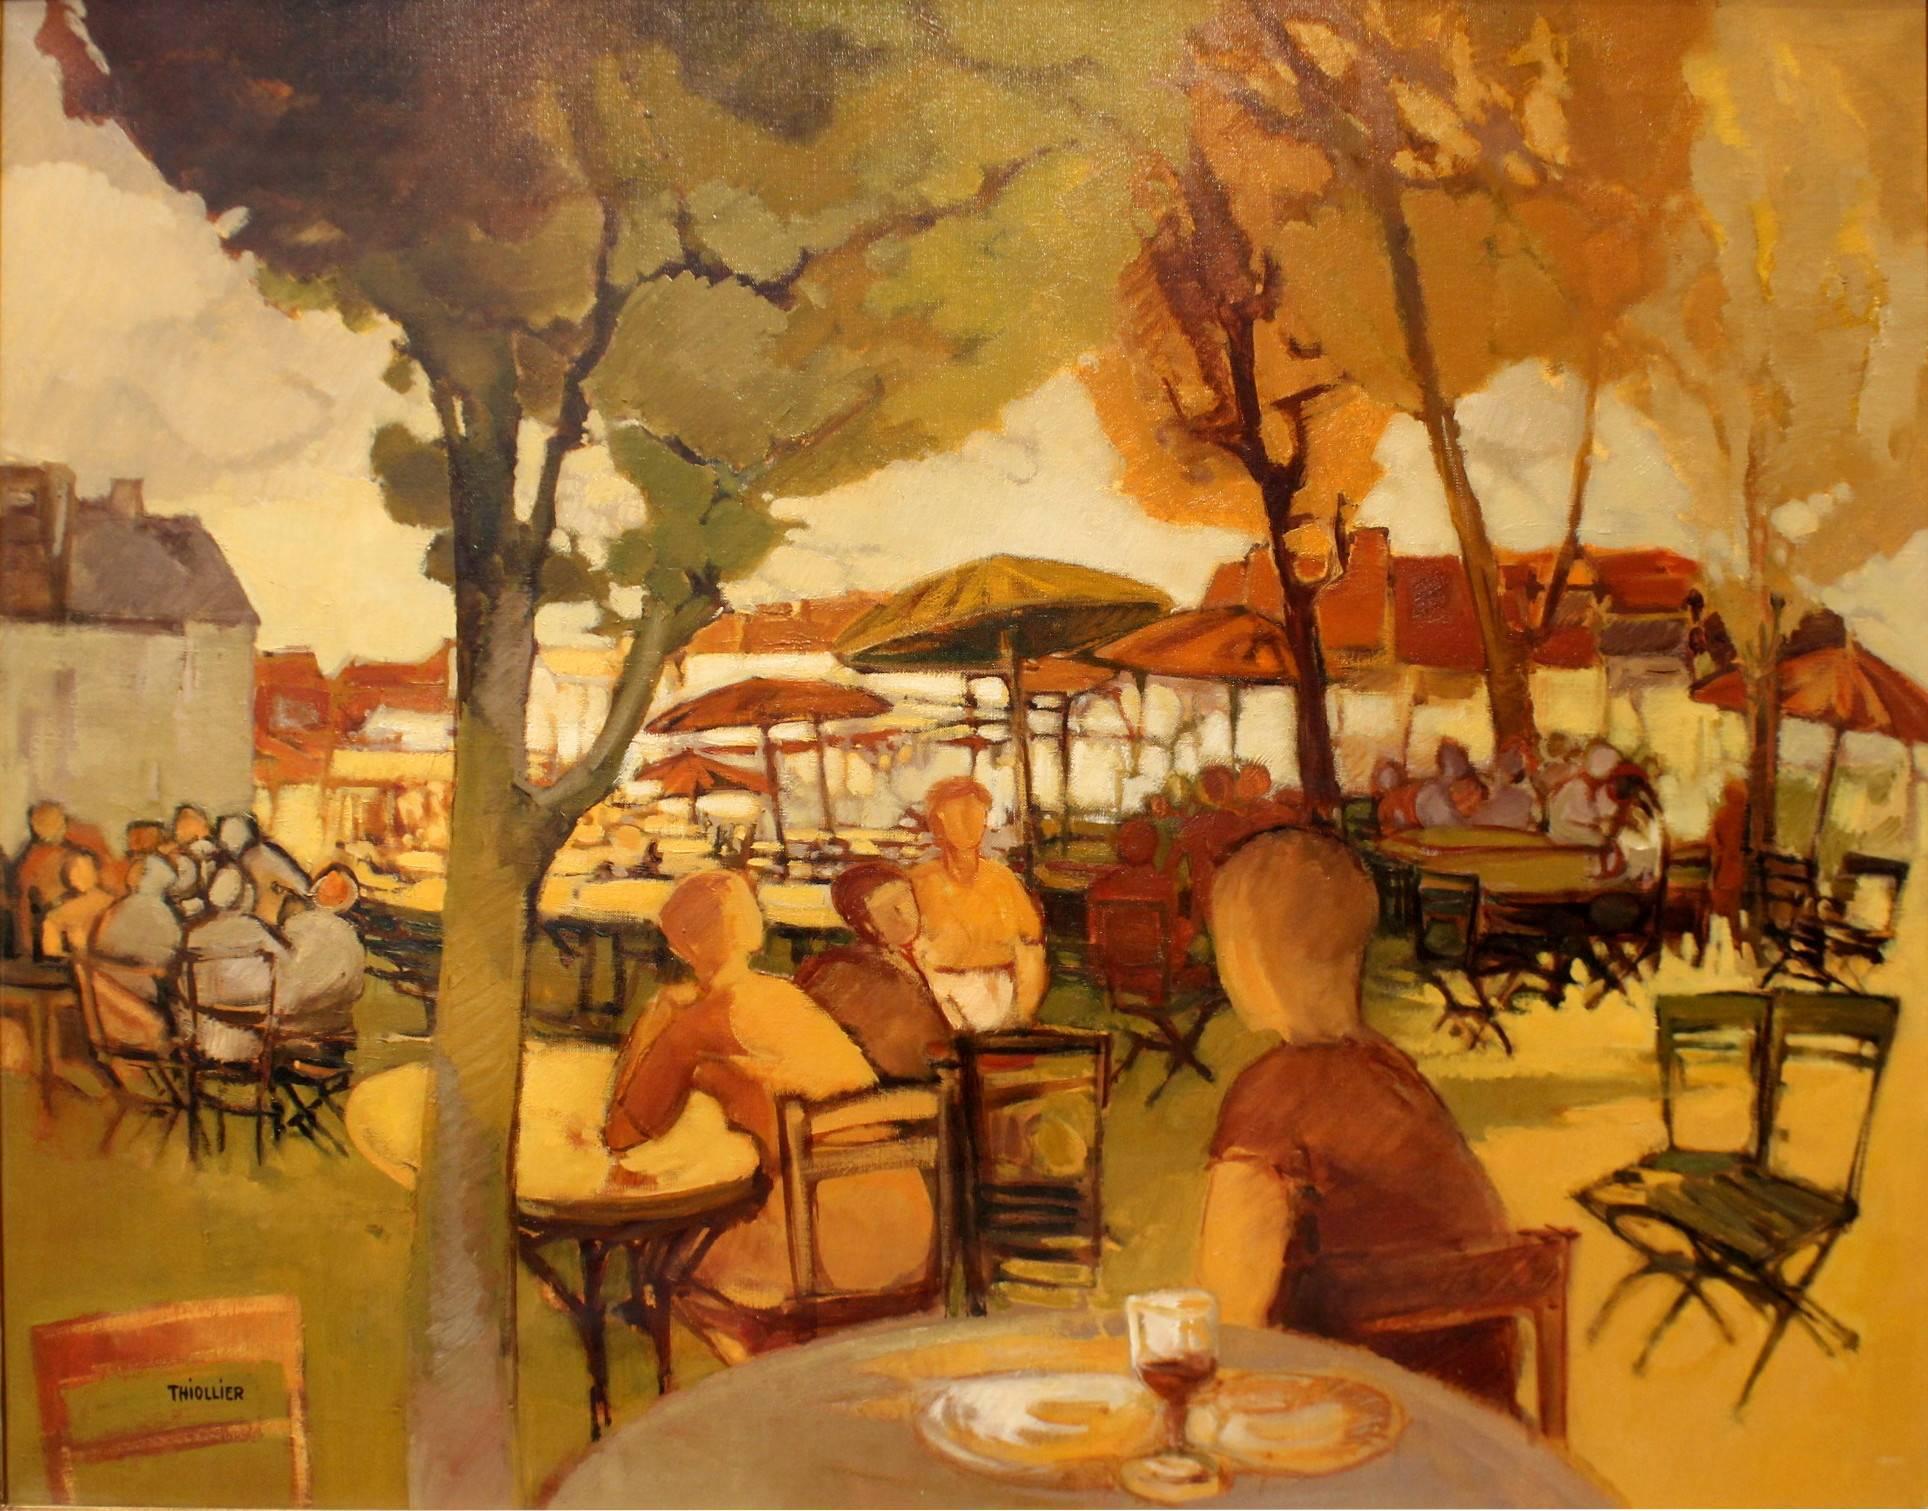 This charming Paris cafe scene was painted by famous Paris School artist Eliane Thiollier (1926-1989) in 1966. Known for her vibrant landscapes composed of warm earth tones and her structured style, Thoillier was an active part of the Parisian art